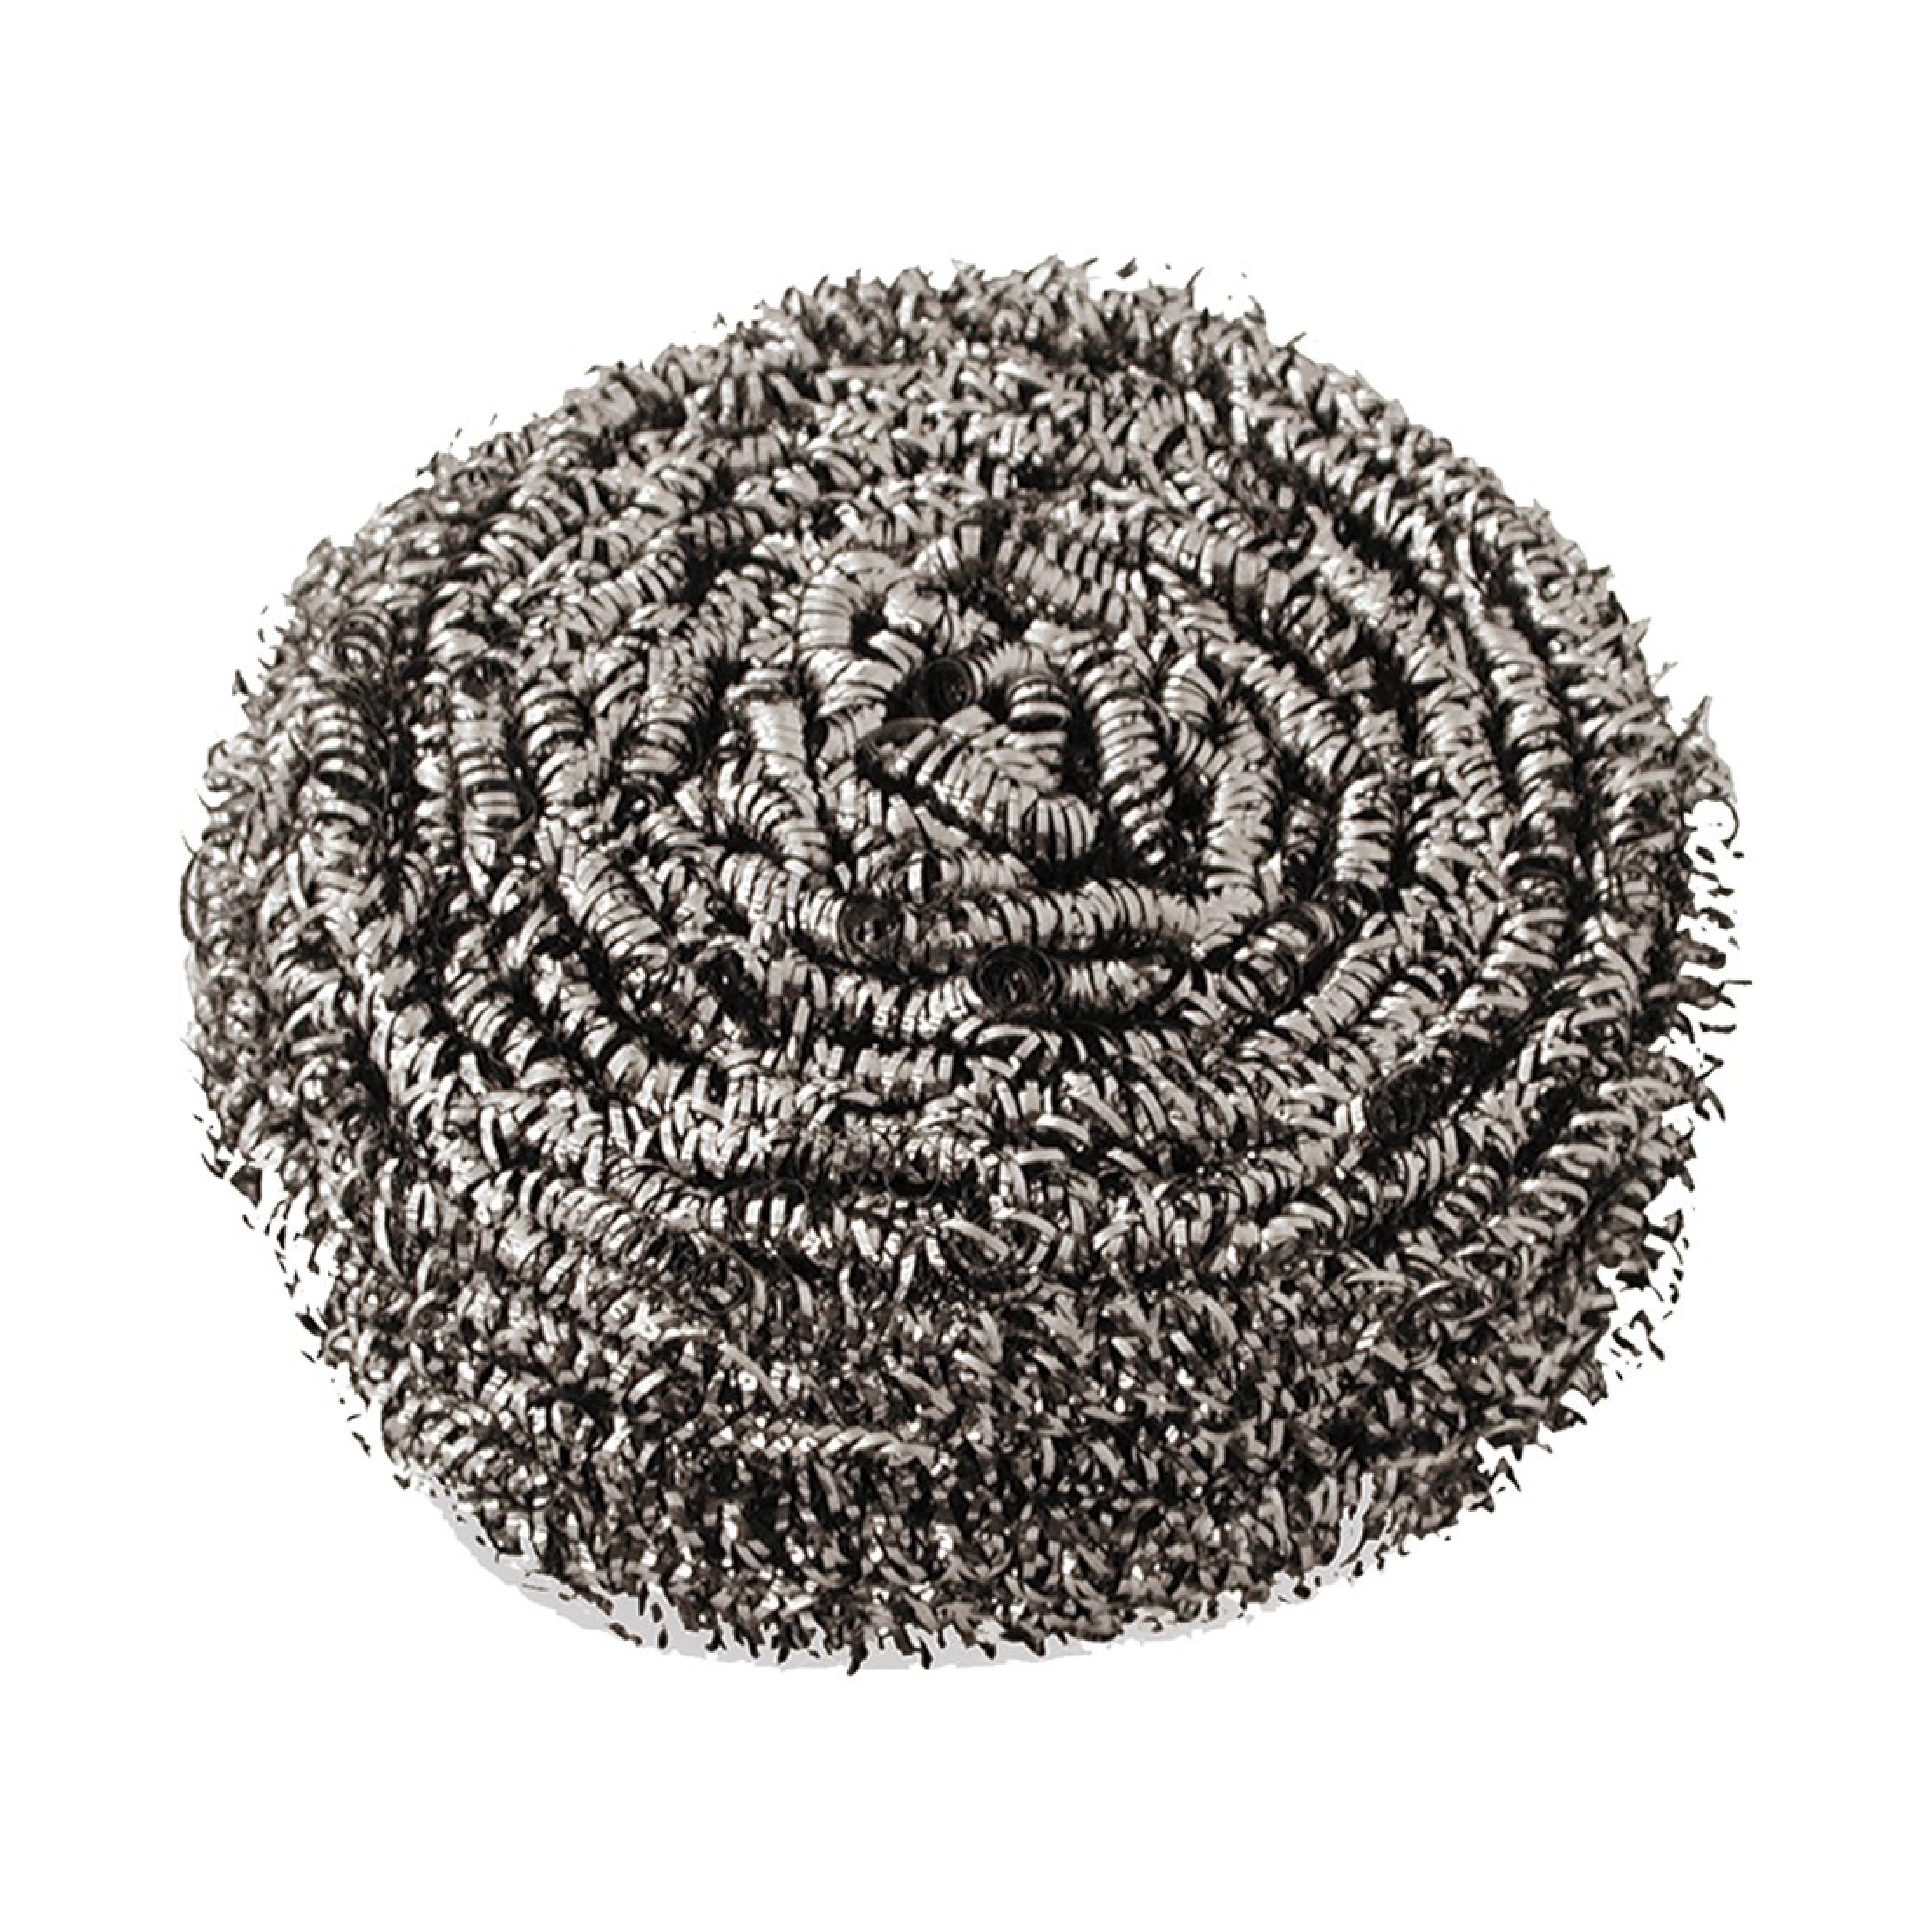 Stainless Steel Scourers 50gm (each)